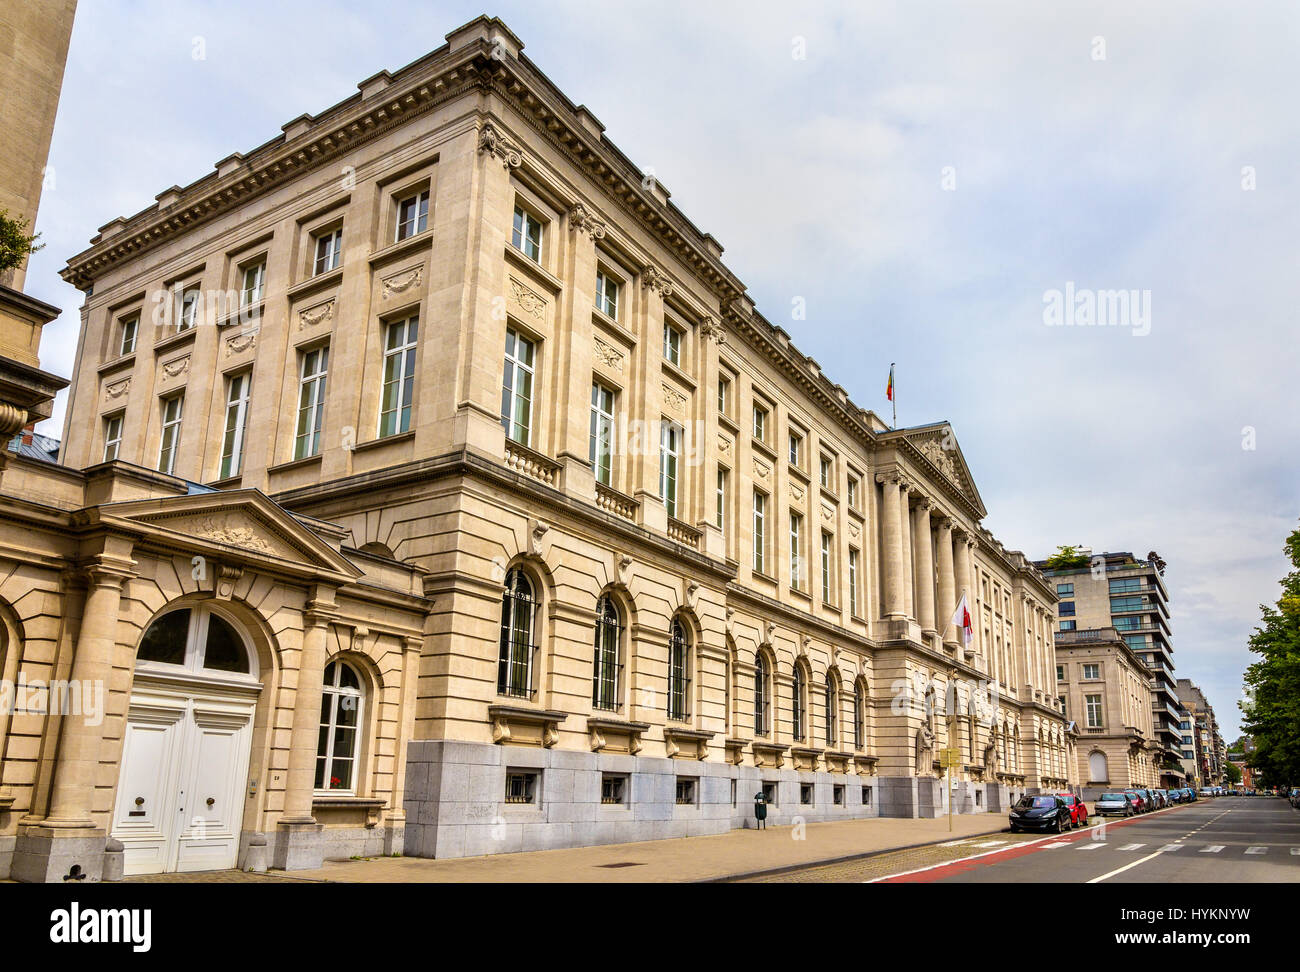 Royal Military Academy in Brussels - Belgium Stock Photo